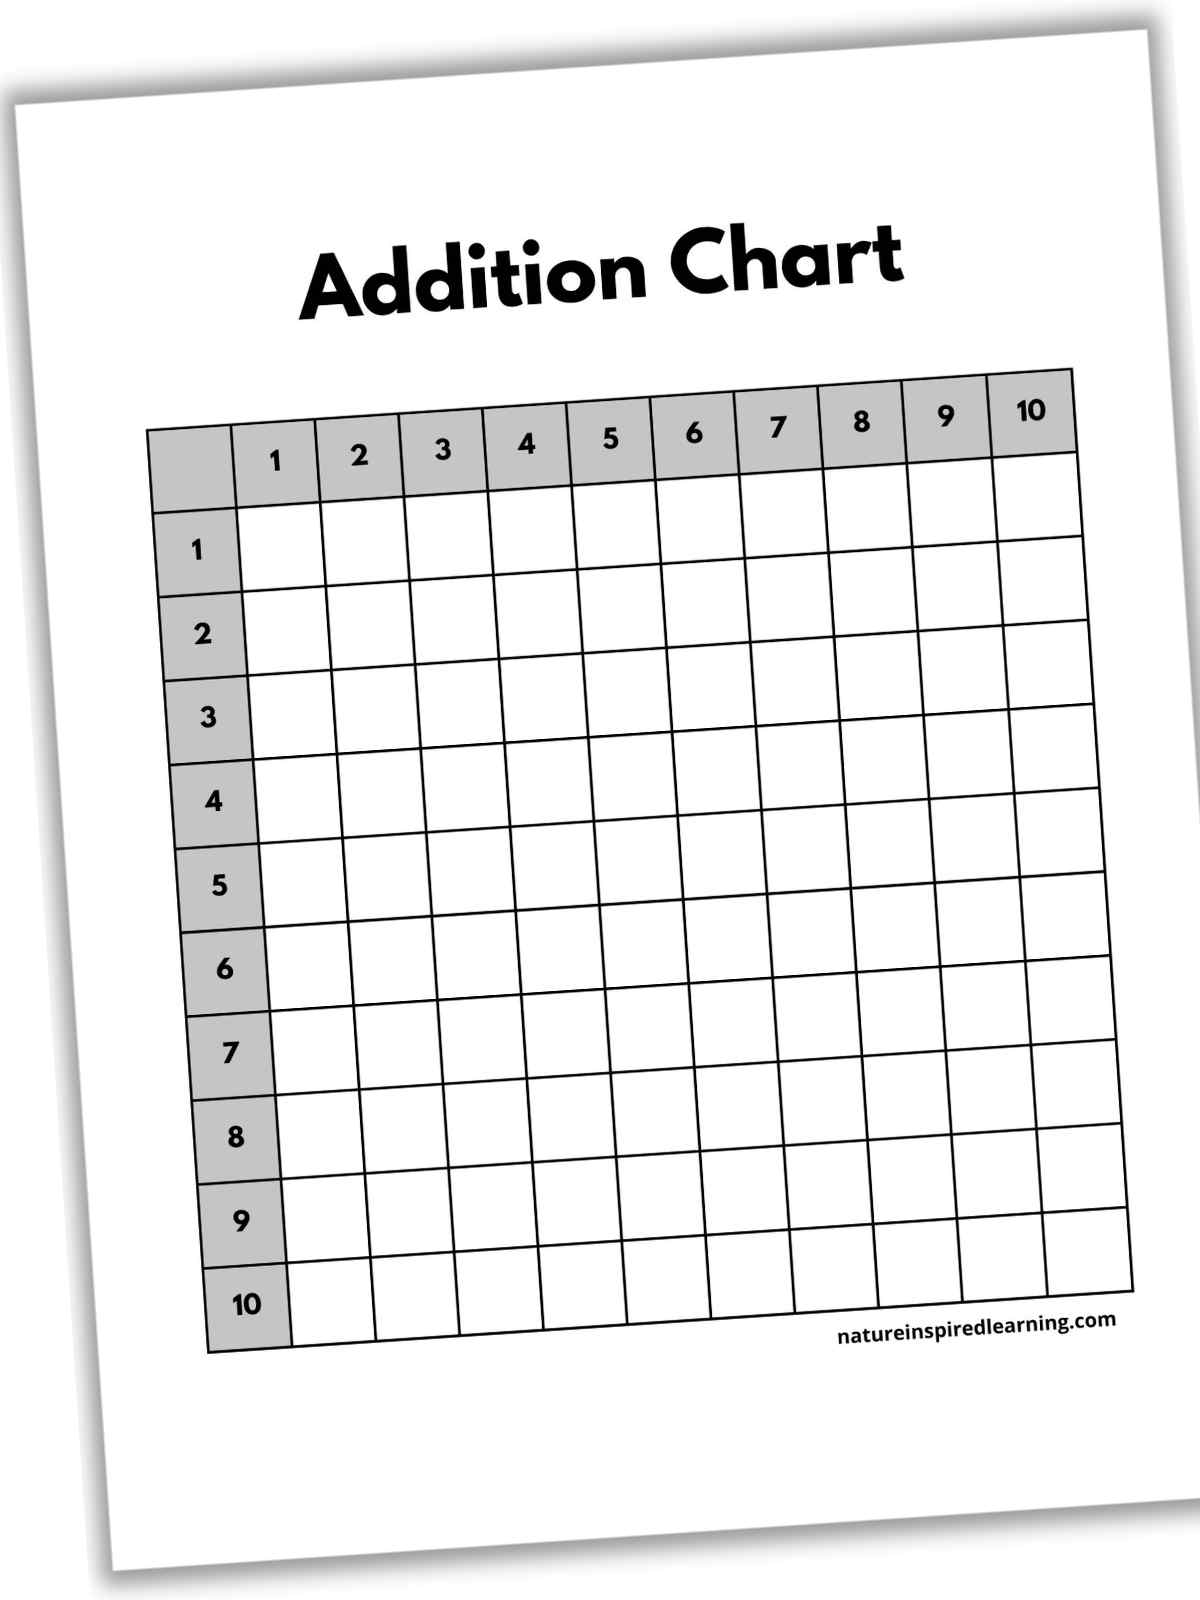 blank black and white addition chart with numbers 1 through 10 grey boxes with the numbers down the side and across the top